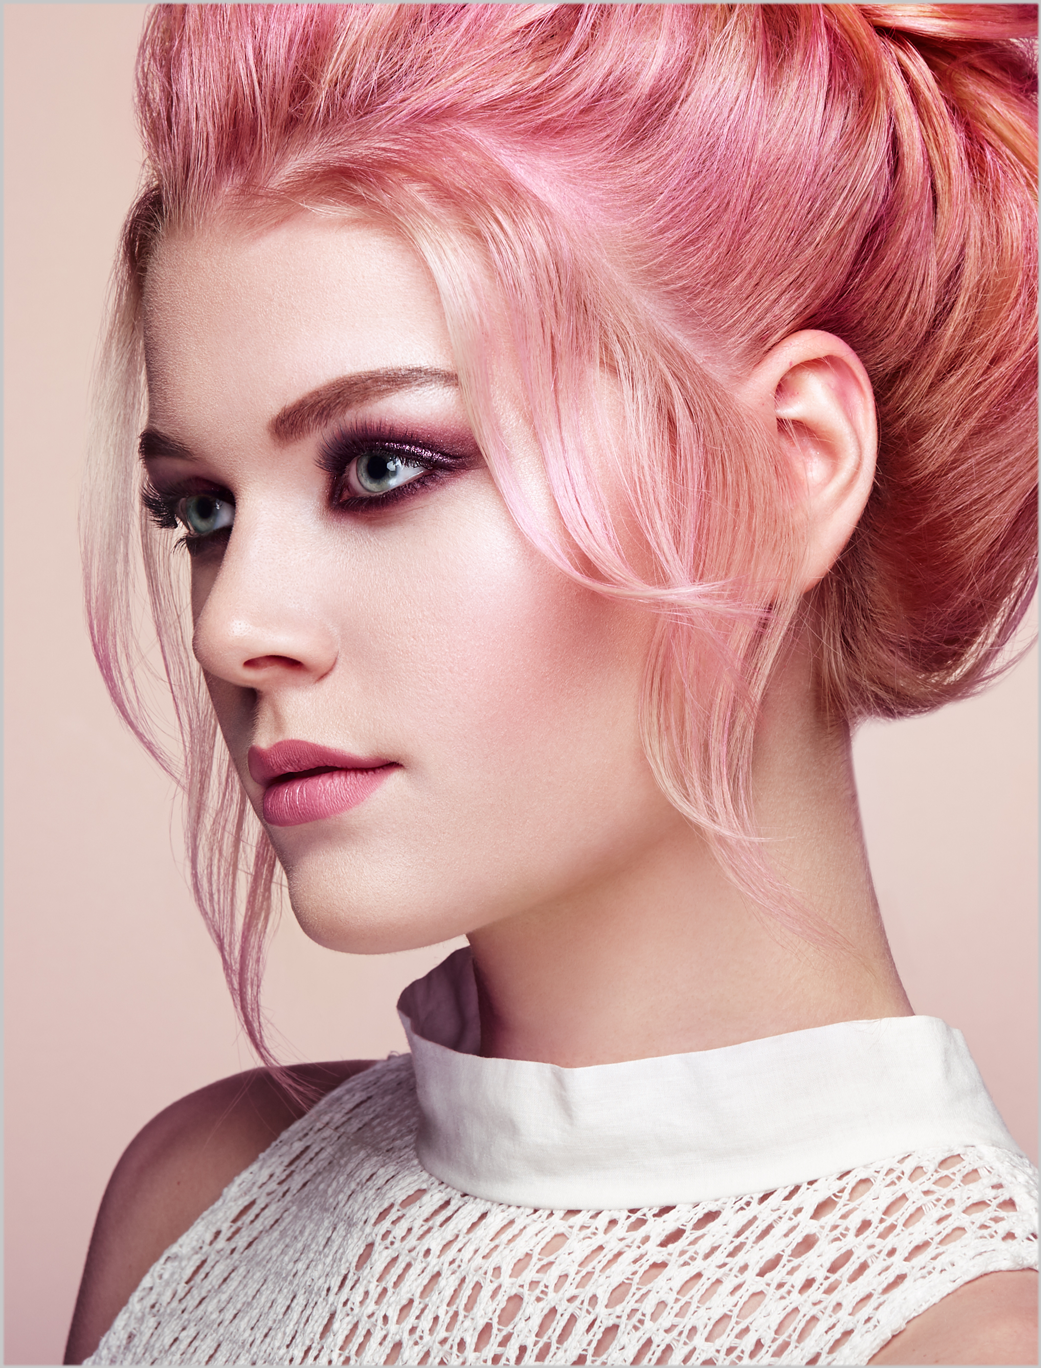 PINK IS THE NEW BLOND. IL GLAM DEI CAPELLI ROSA.